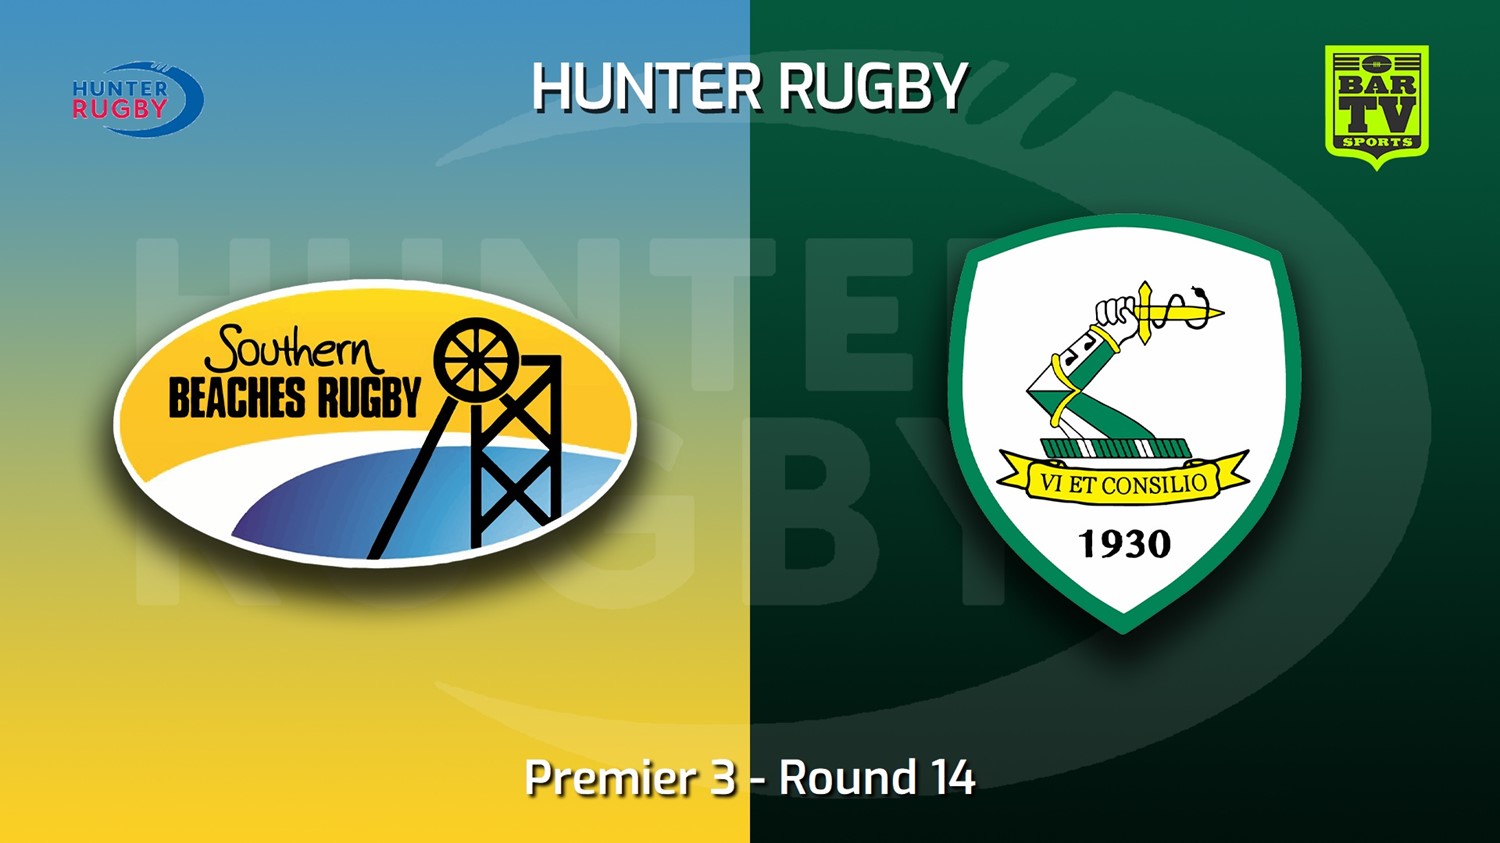 220730-Hunter Rugby Round 14 - Premier 3 - Southern Beaches v Merewether Carlton Slate Image